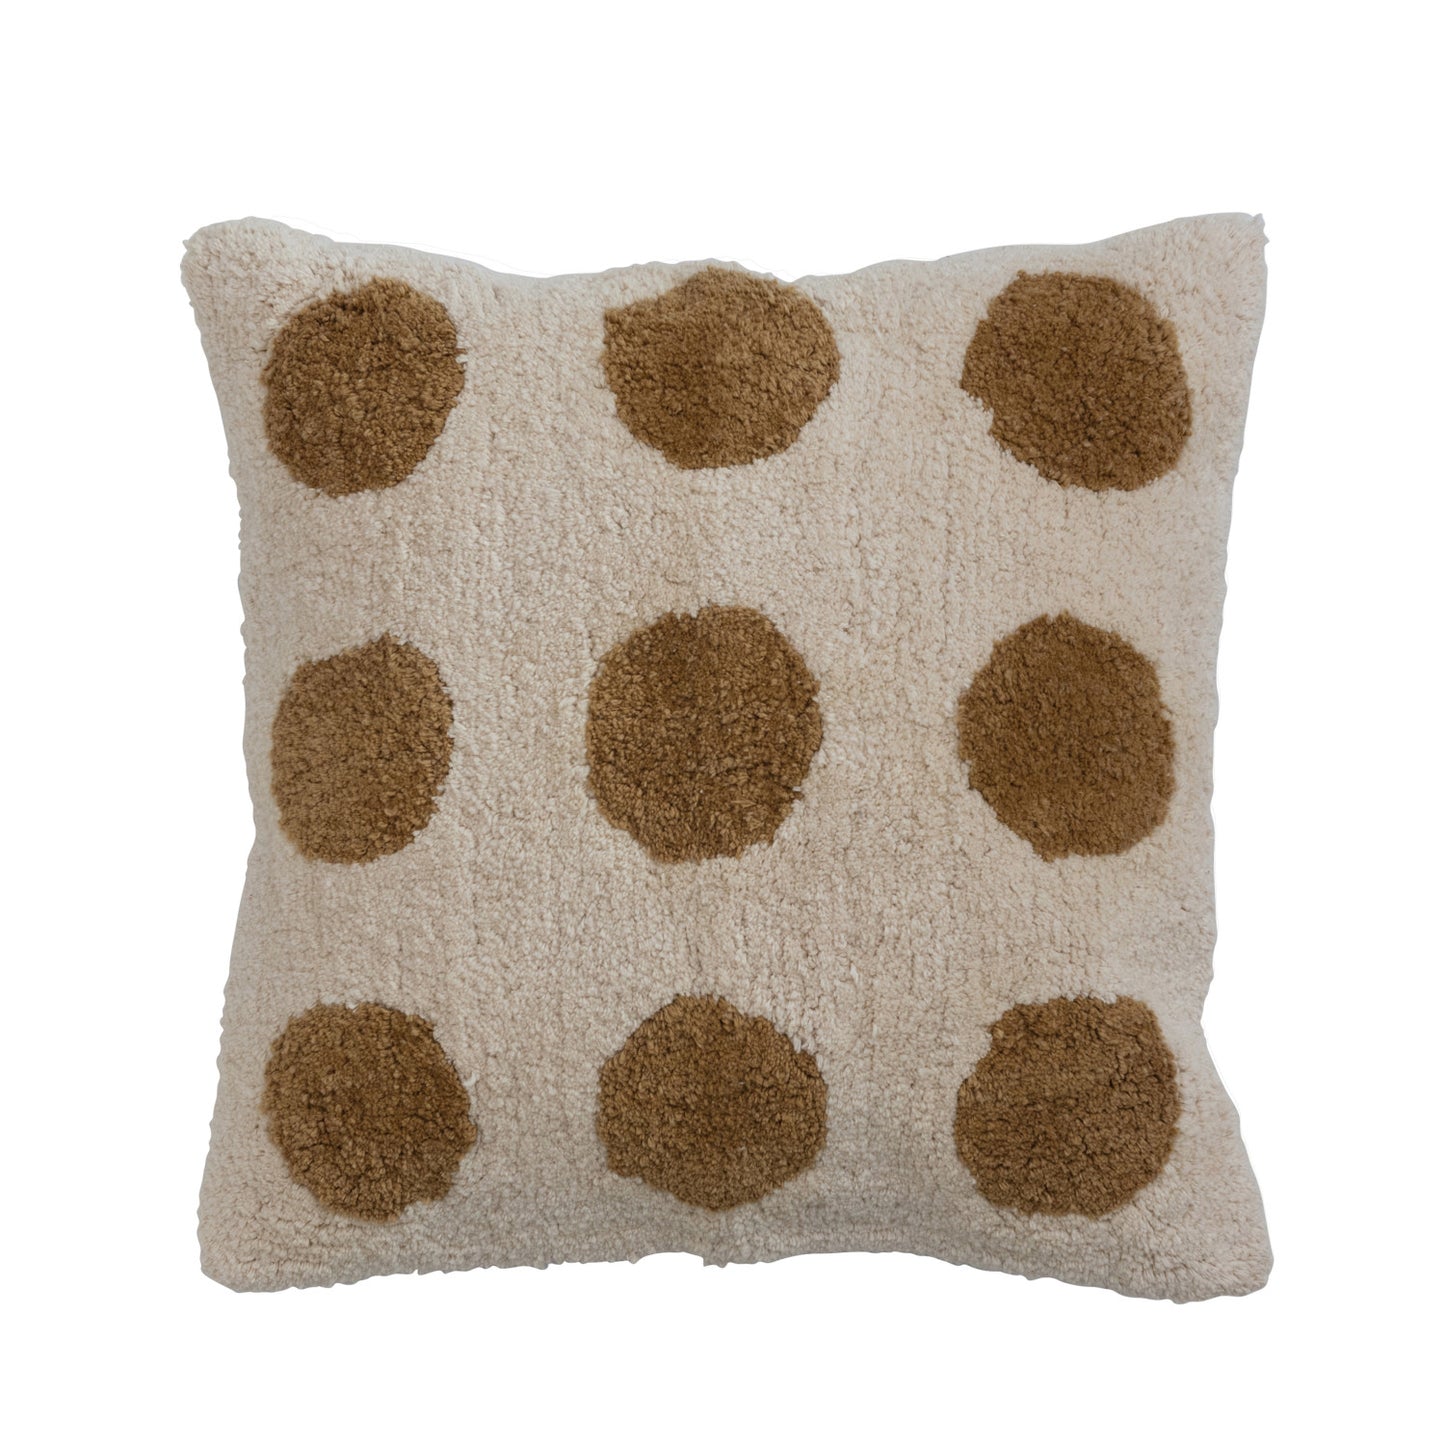 18" Cotton Tufted Pillow w/ Dots & Chambray Back, Polyester Fill